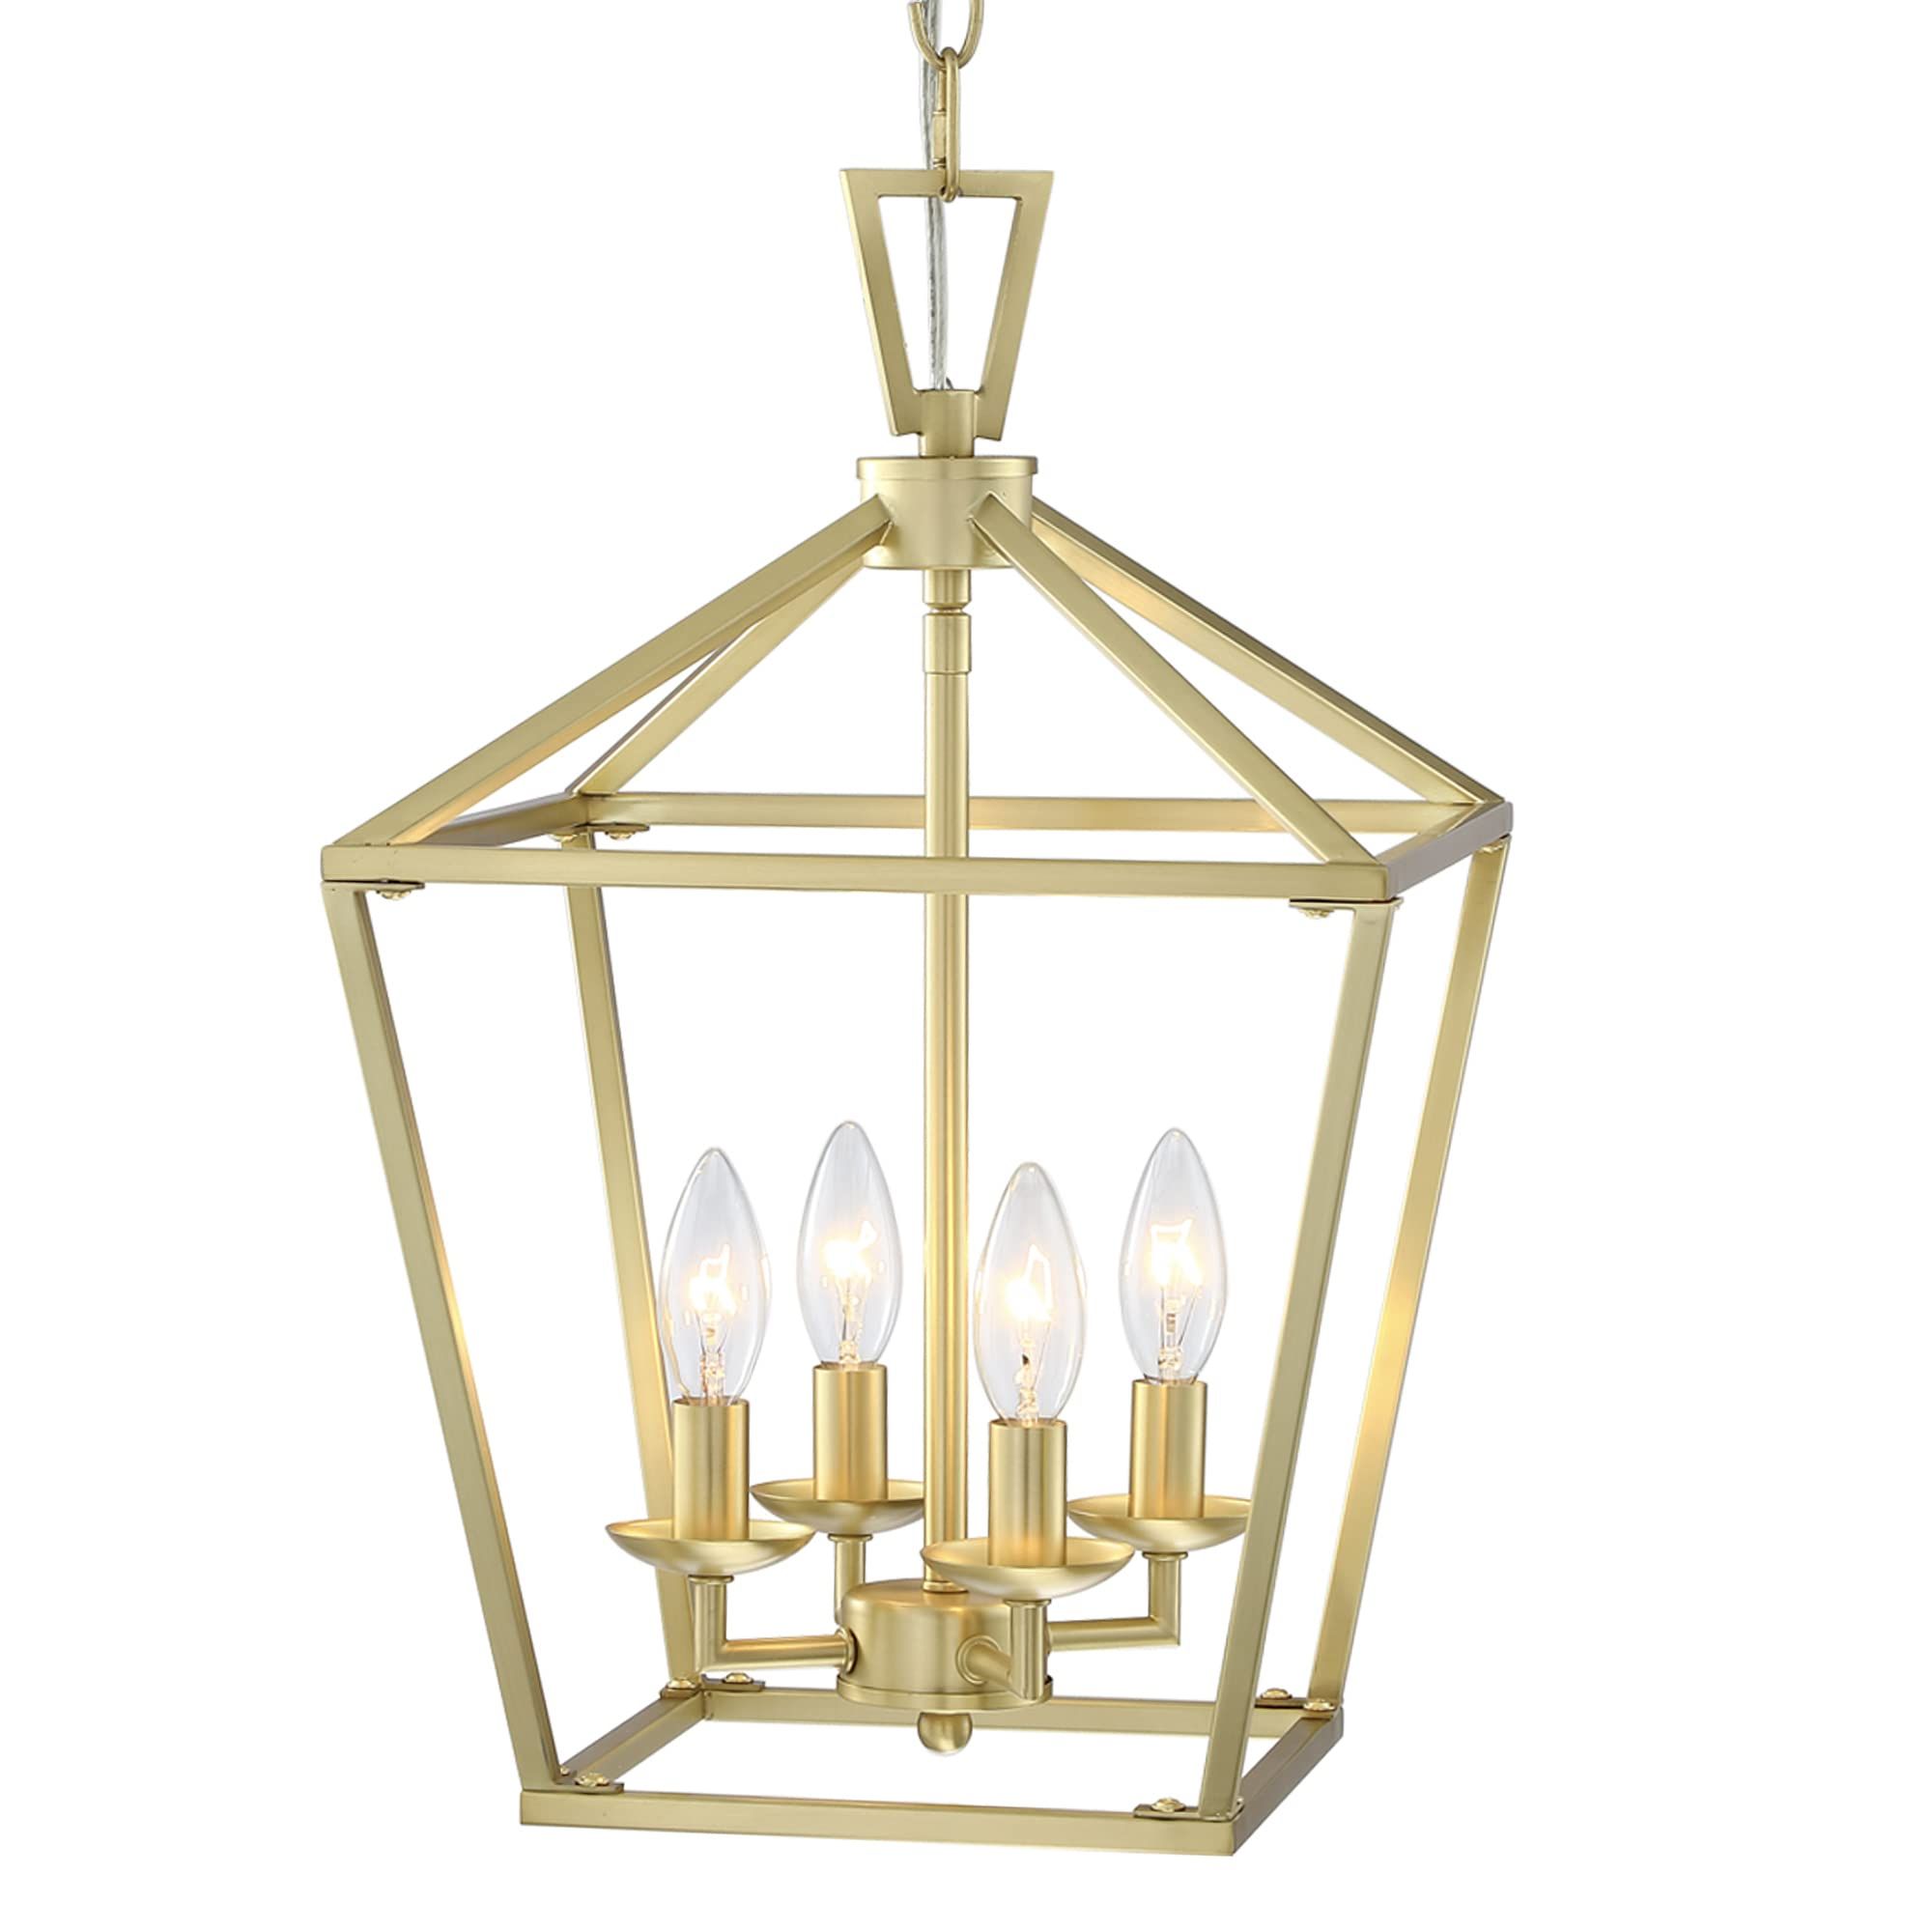 Gilded Gold Lantern Chandeliers With Preferred Untrammelife Gold Lantern Chandelier 4 Light Pendant Light Modern Hanging Pendant  Light Fixtures In Brushed Brass Finish, Adjustable Metal Chain Geometric  Chandelier For Kitchen Island Stair Foyer – – Amazon (View 7 of 15)